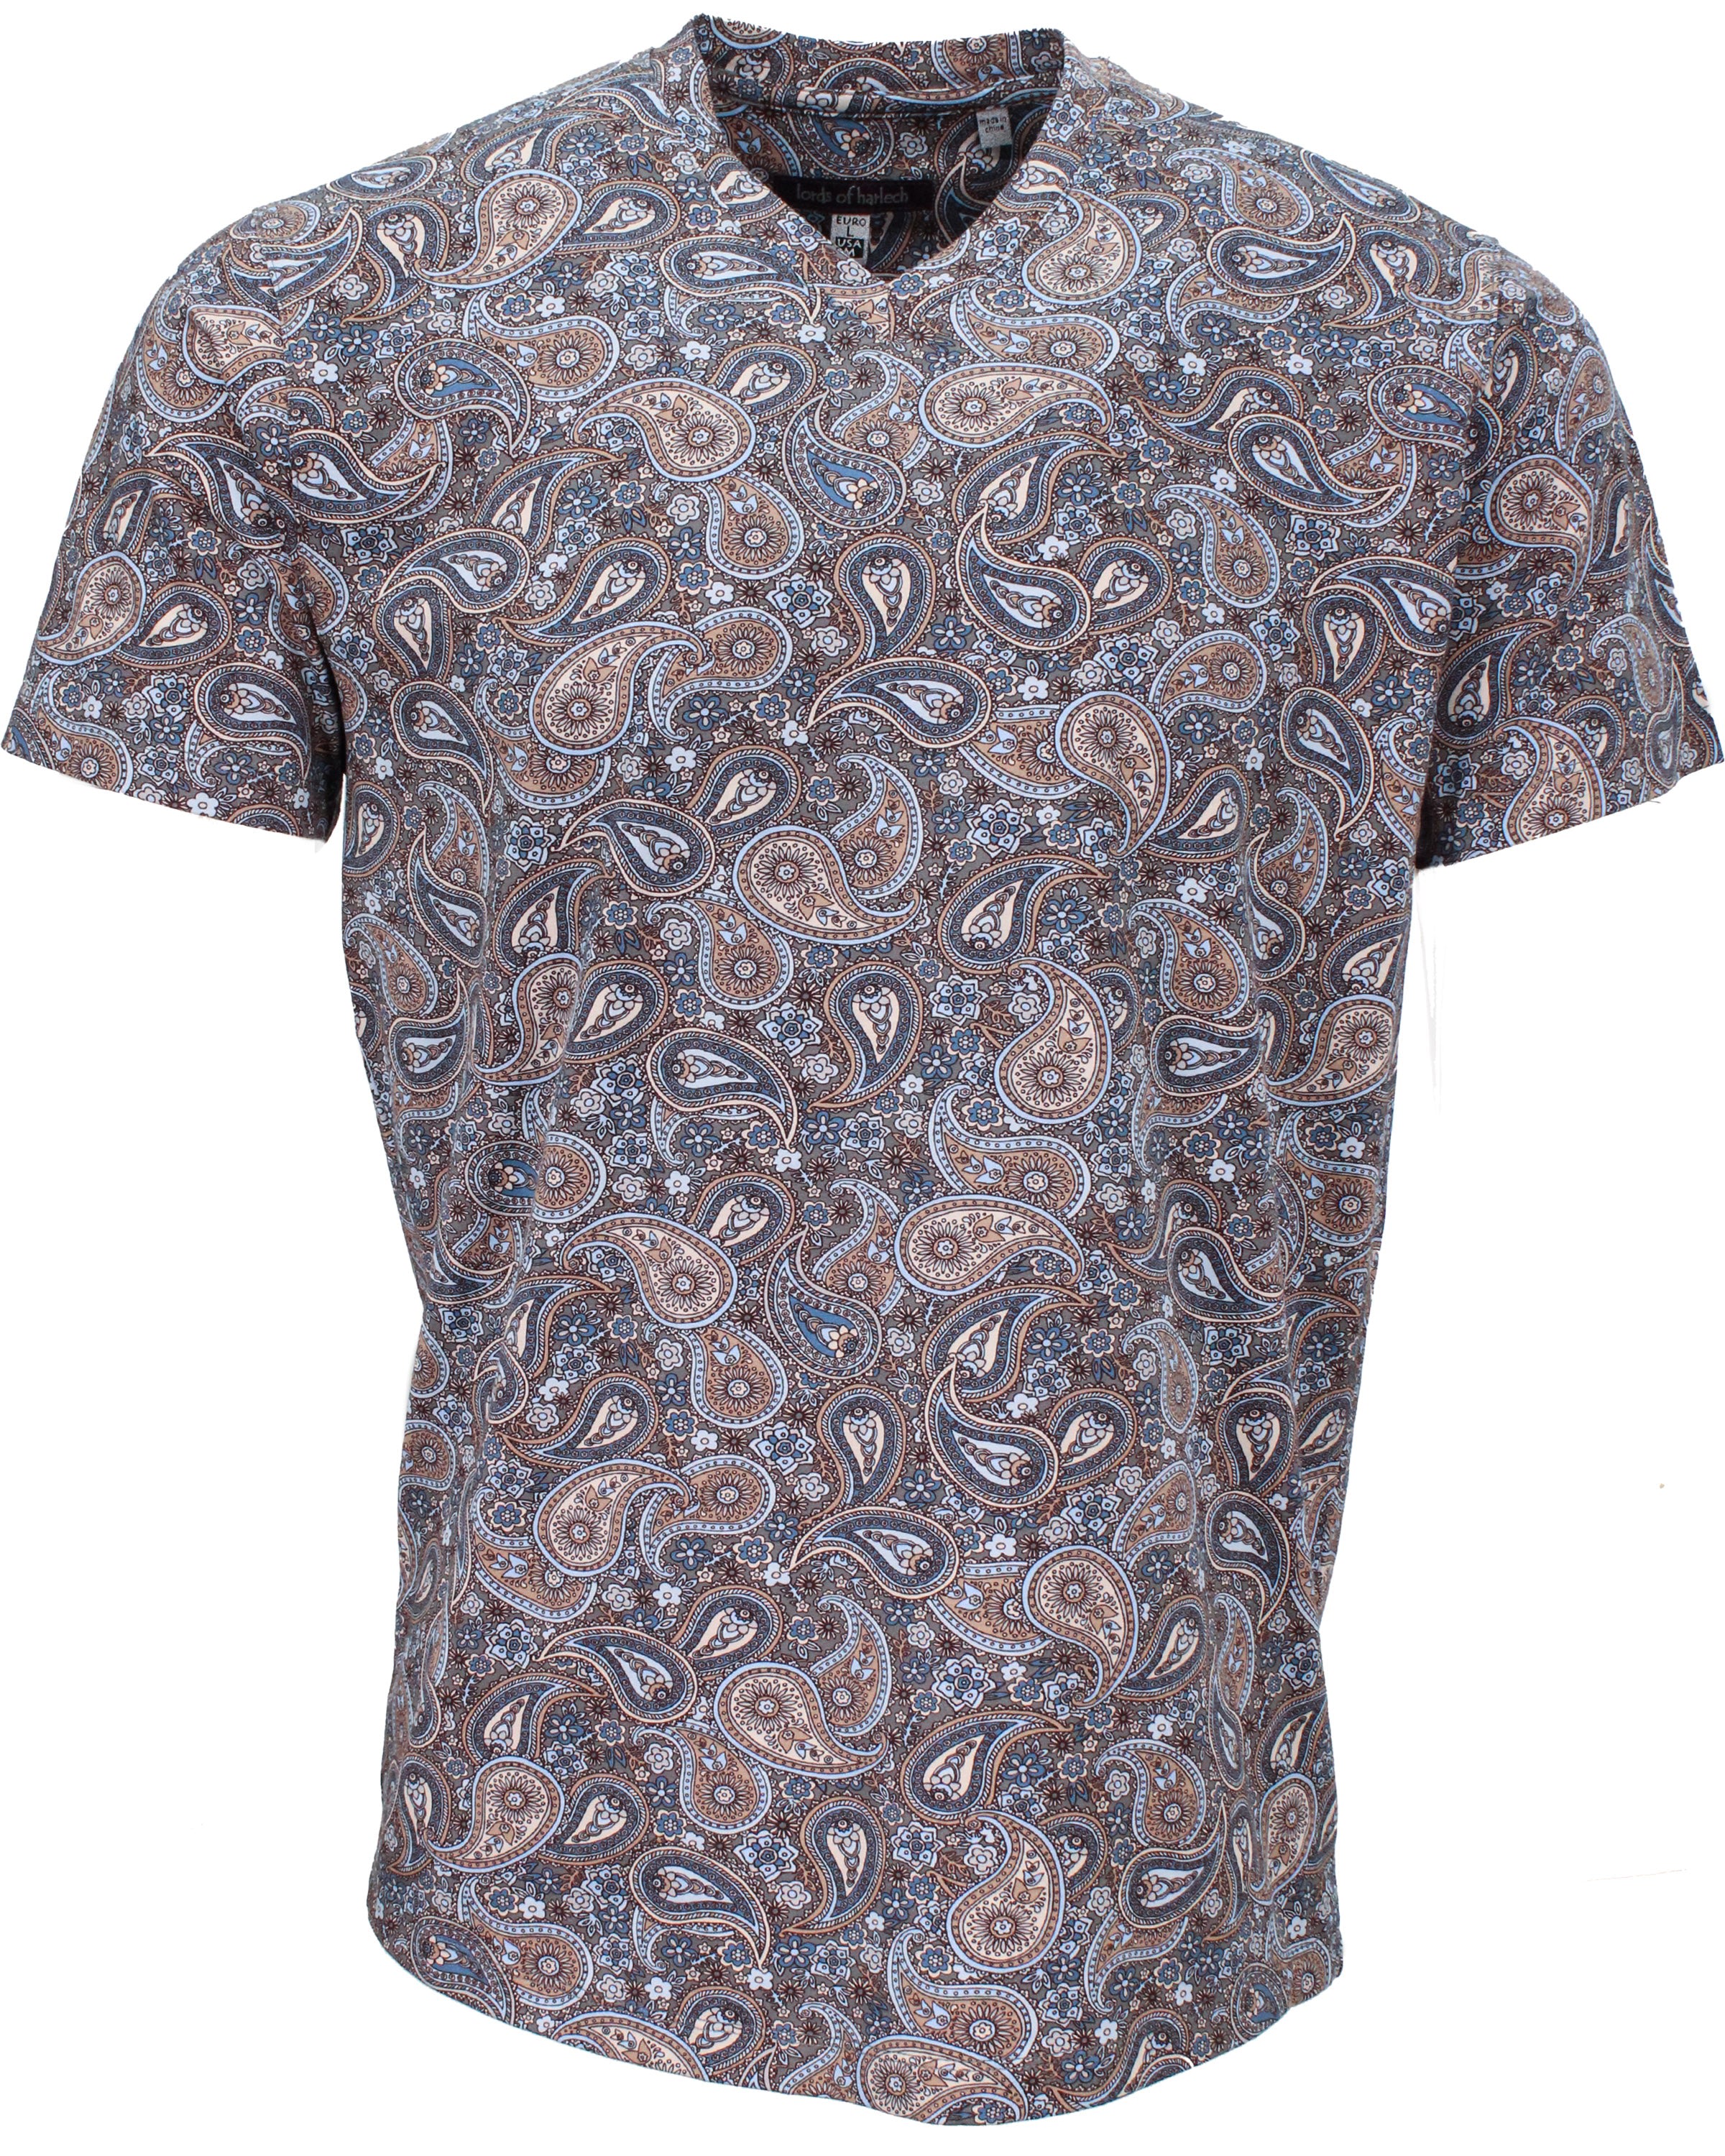 Men’s Neutrals / Grey Maze Trippy Paisley V-Neck Tee - Grey Small Lords of Harlech